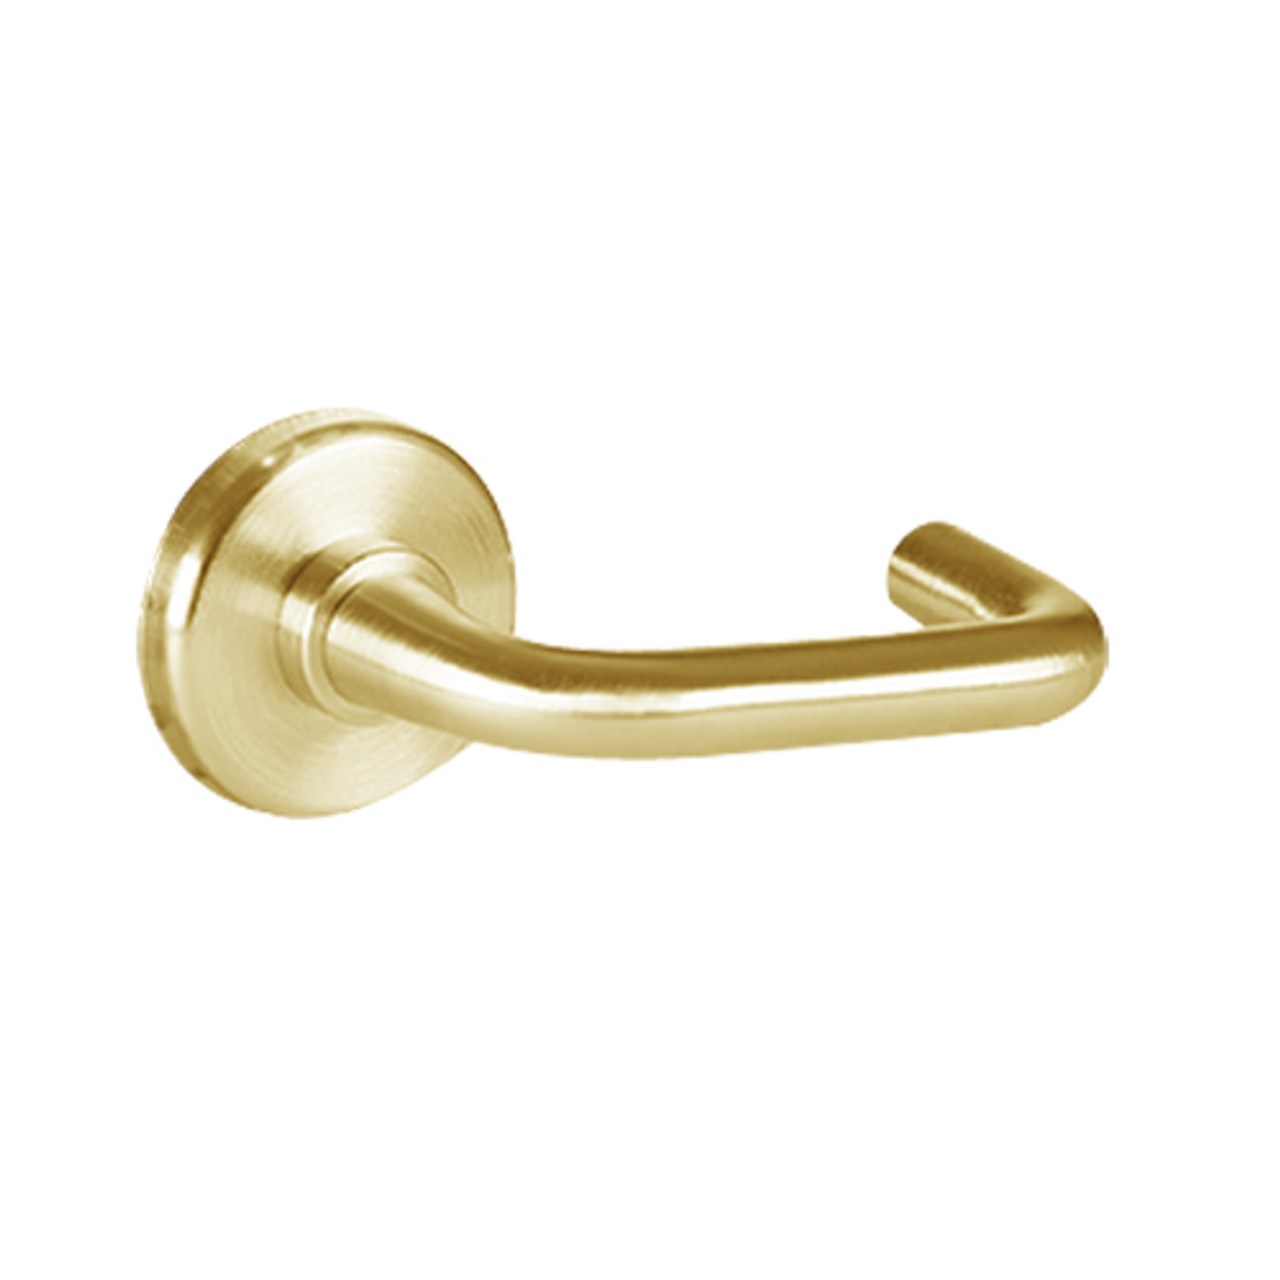 40HTKOS33H606 Best 40H Series Trim Kits Outside Lever w/ Emergency Plate with Solid Tube-Return Trim Style in Satin Brass